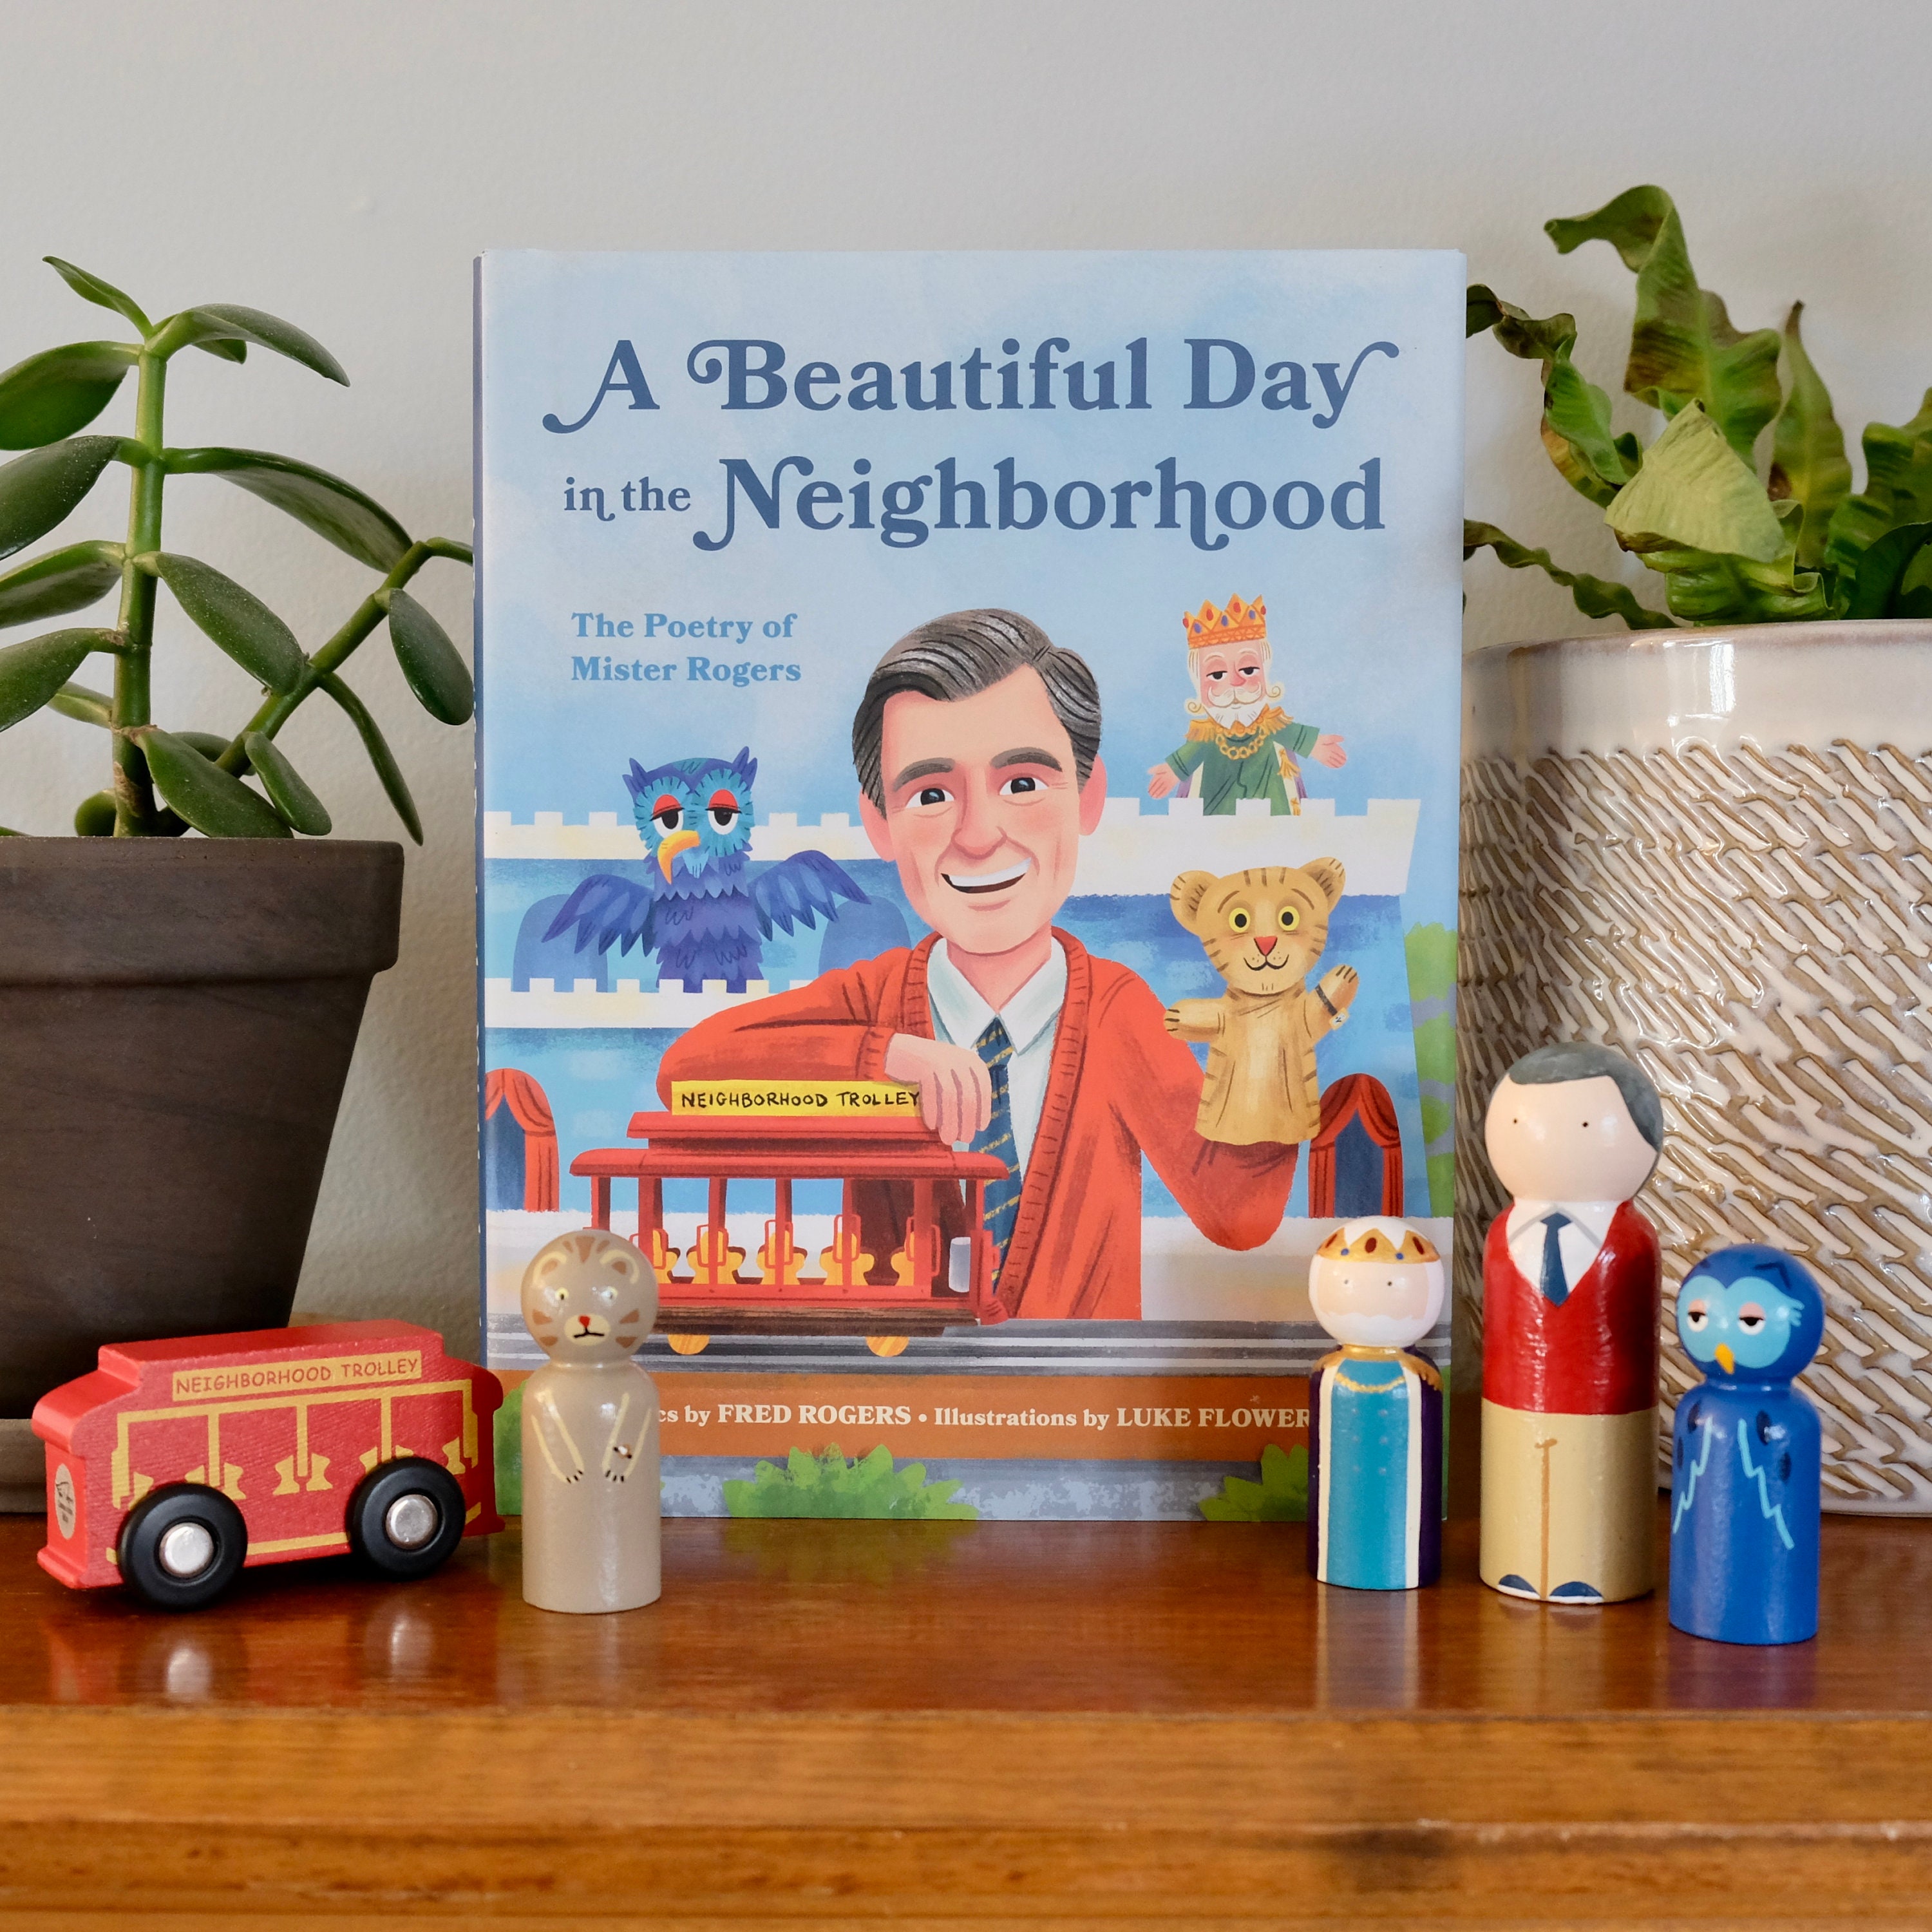 A Beautiful Day in the Neighborhood: The Poetry of Mister Rogers